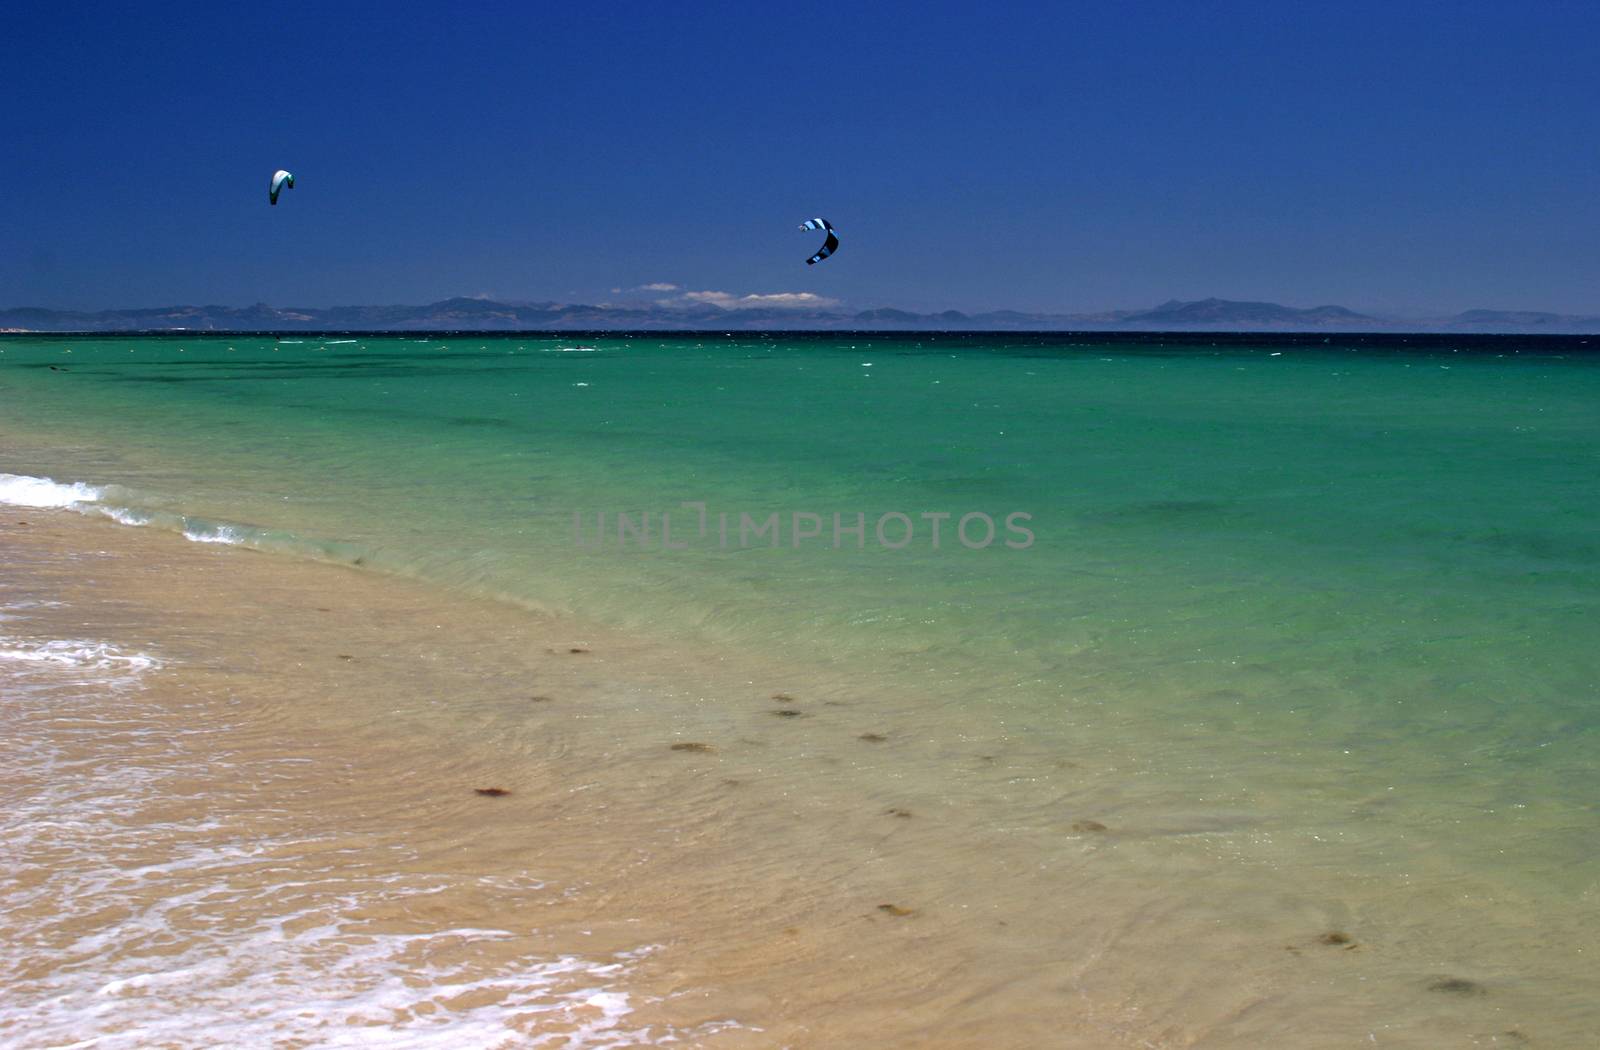 View Of Kite Surfers From A White Sandy Beach In Spain, Europe, On A Hot Sunny Day On Vacation.